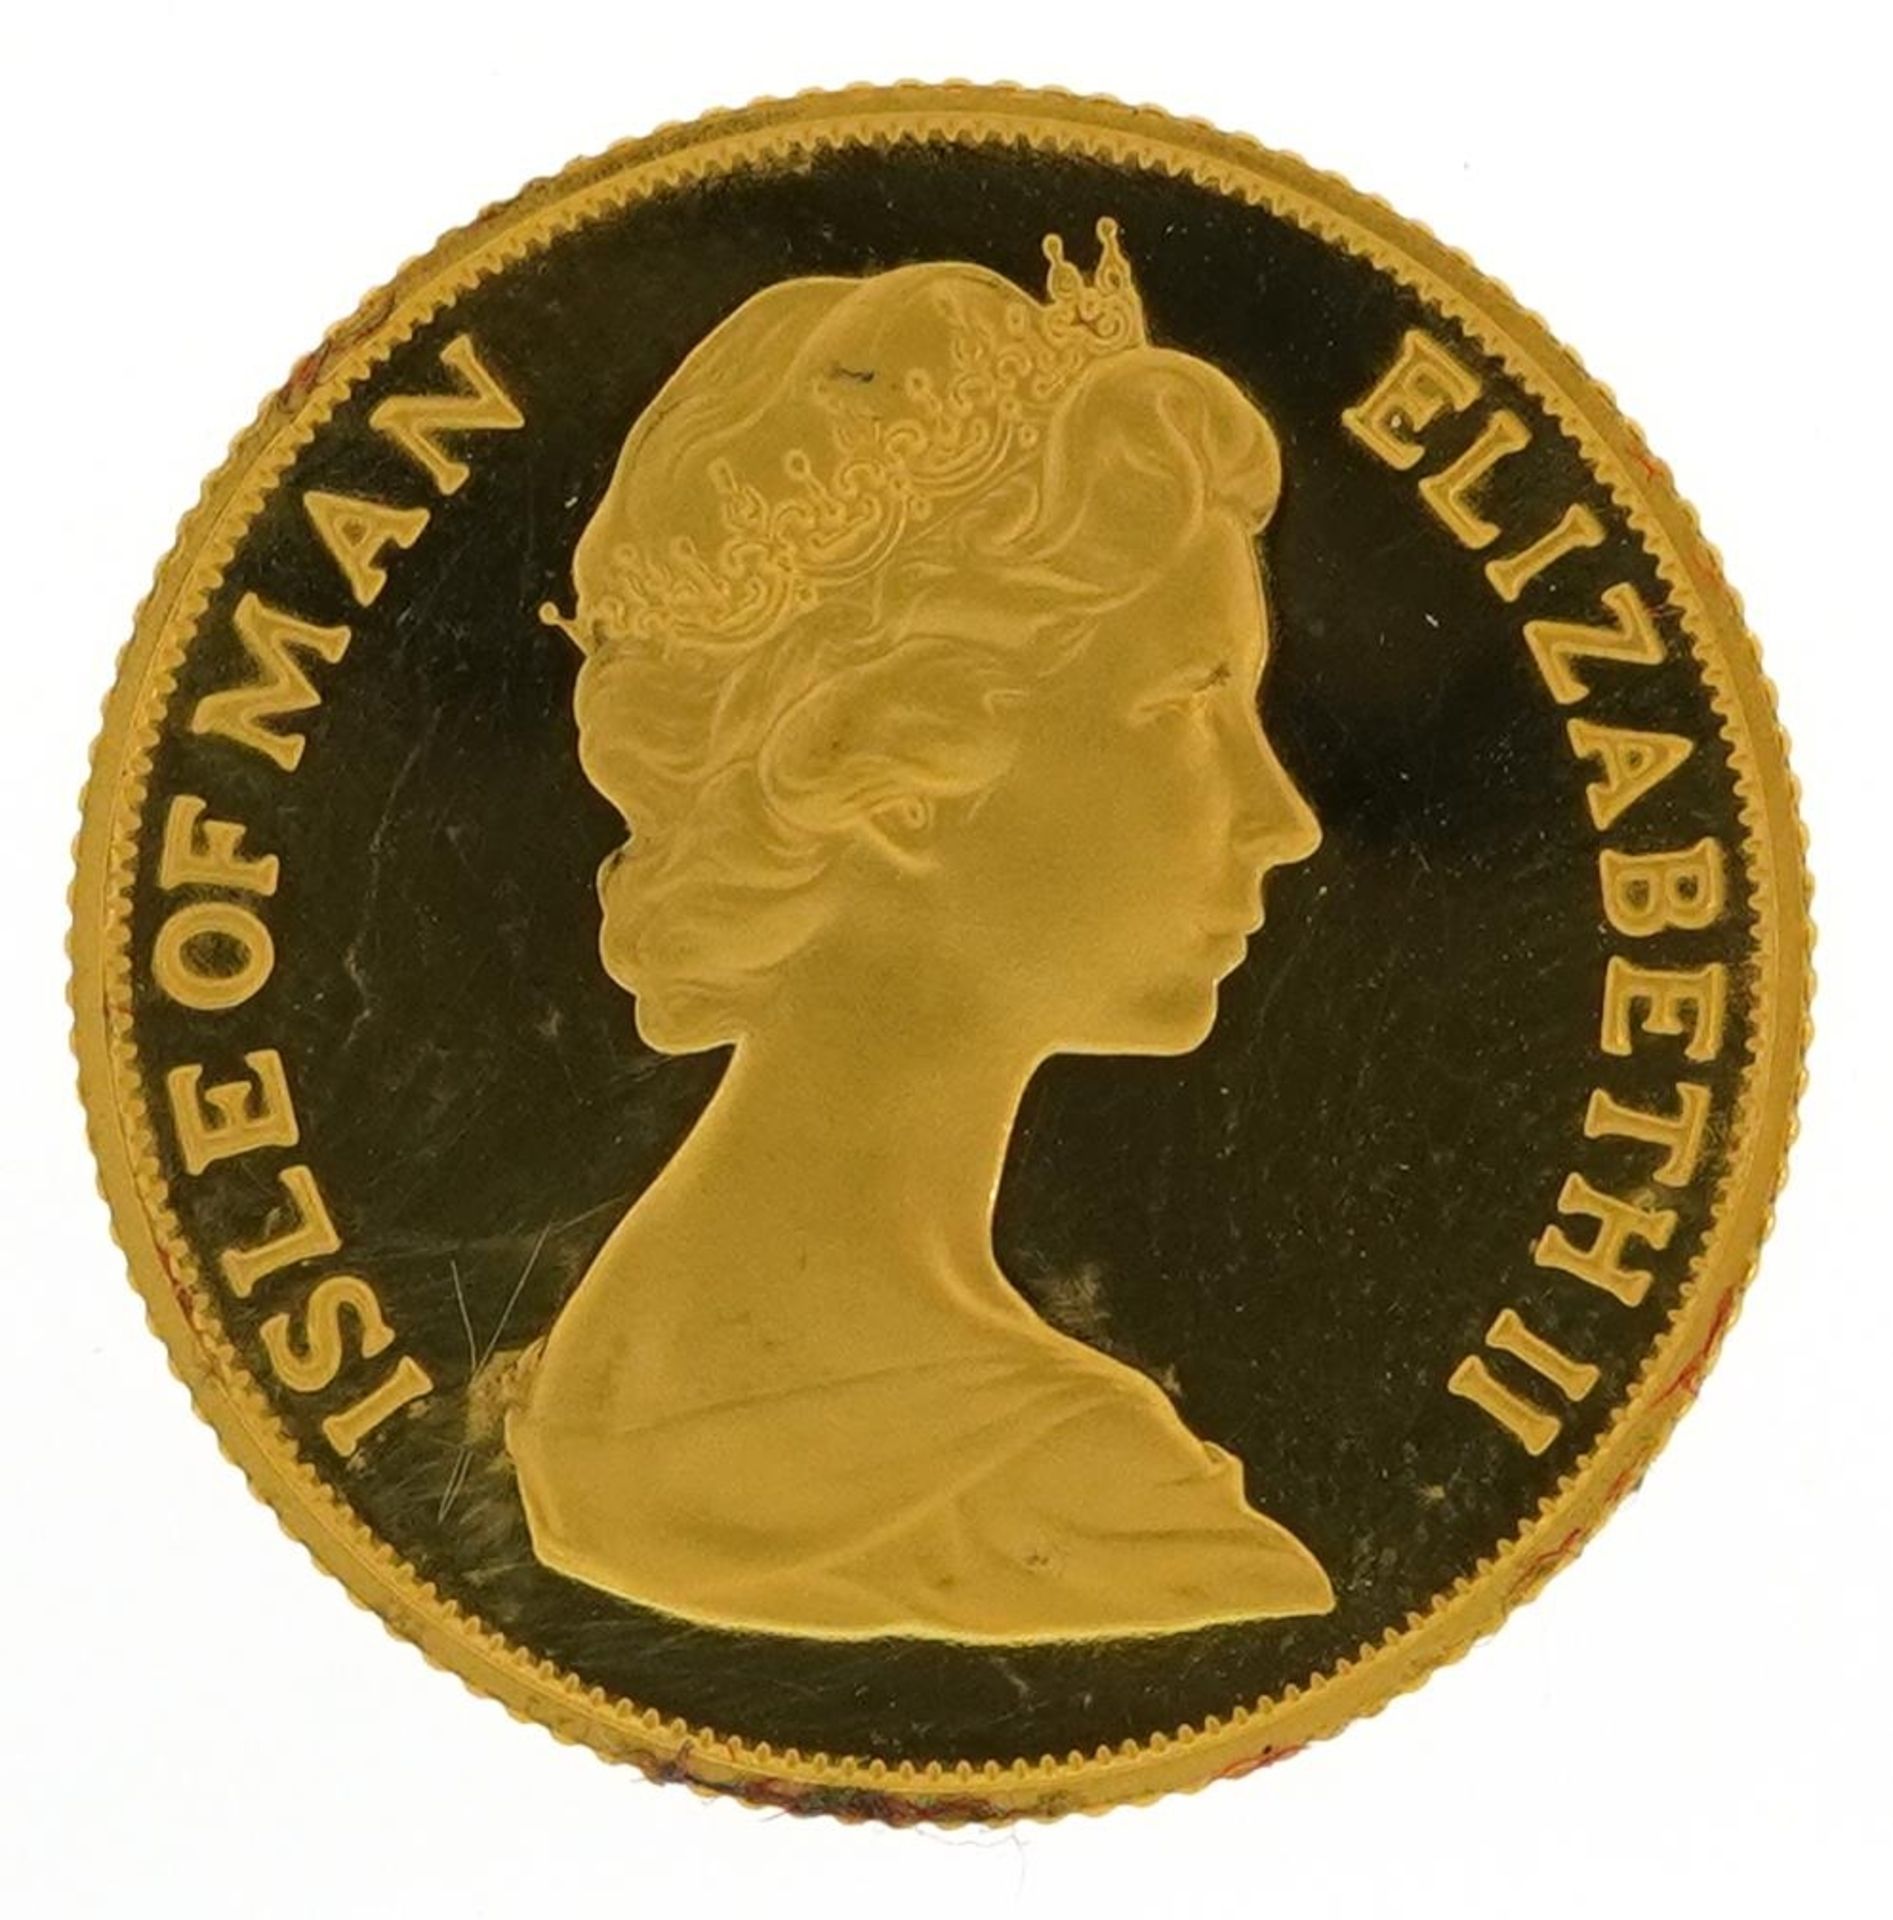 Elizabeth II Isle of Man 1983 Manx gold proof sovereign housed in a Pobjoy Mint book design case - Image 2 of 4